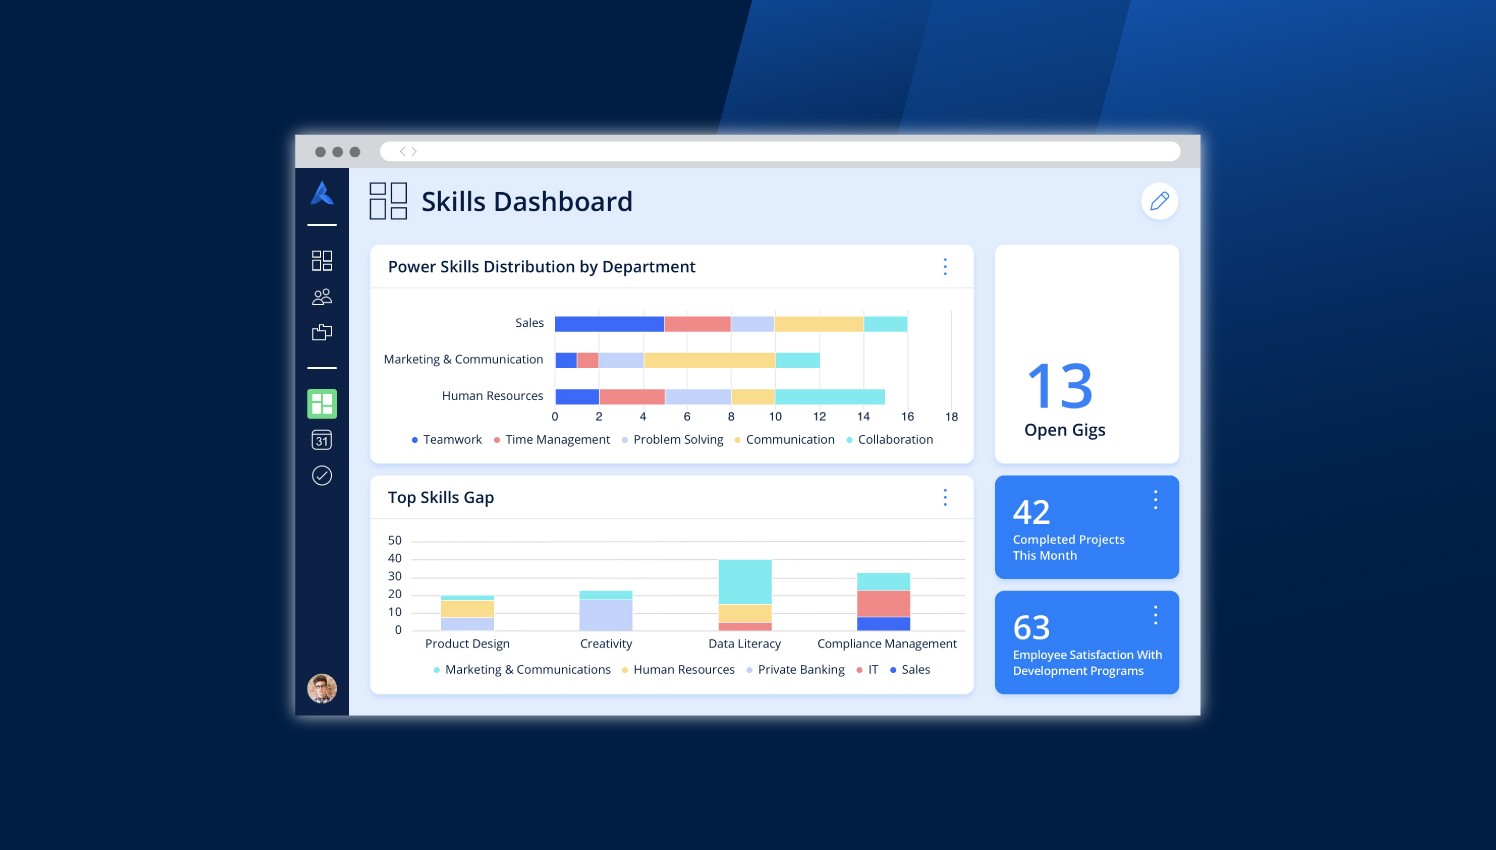 A dashboard with charts analyzing skill distribution by department, top skill gaps, total open gigs and other metrics.